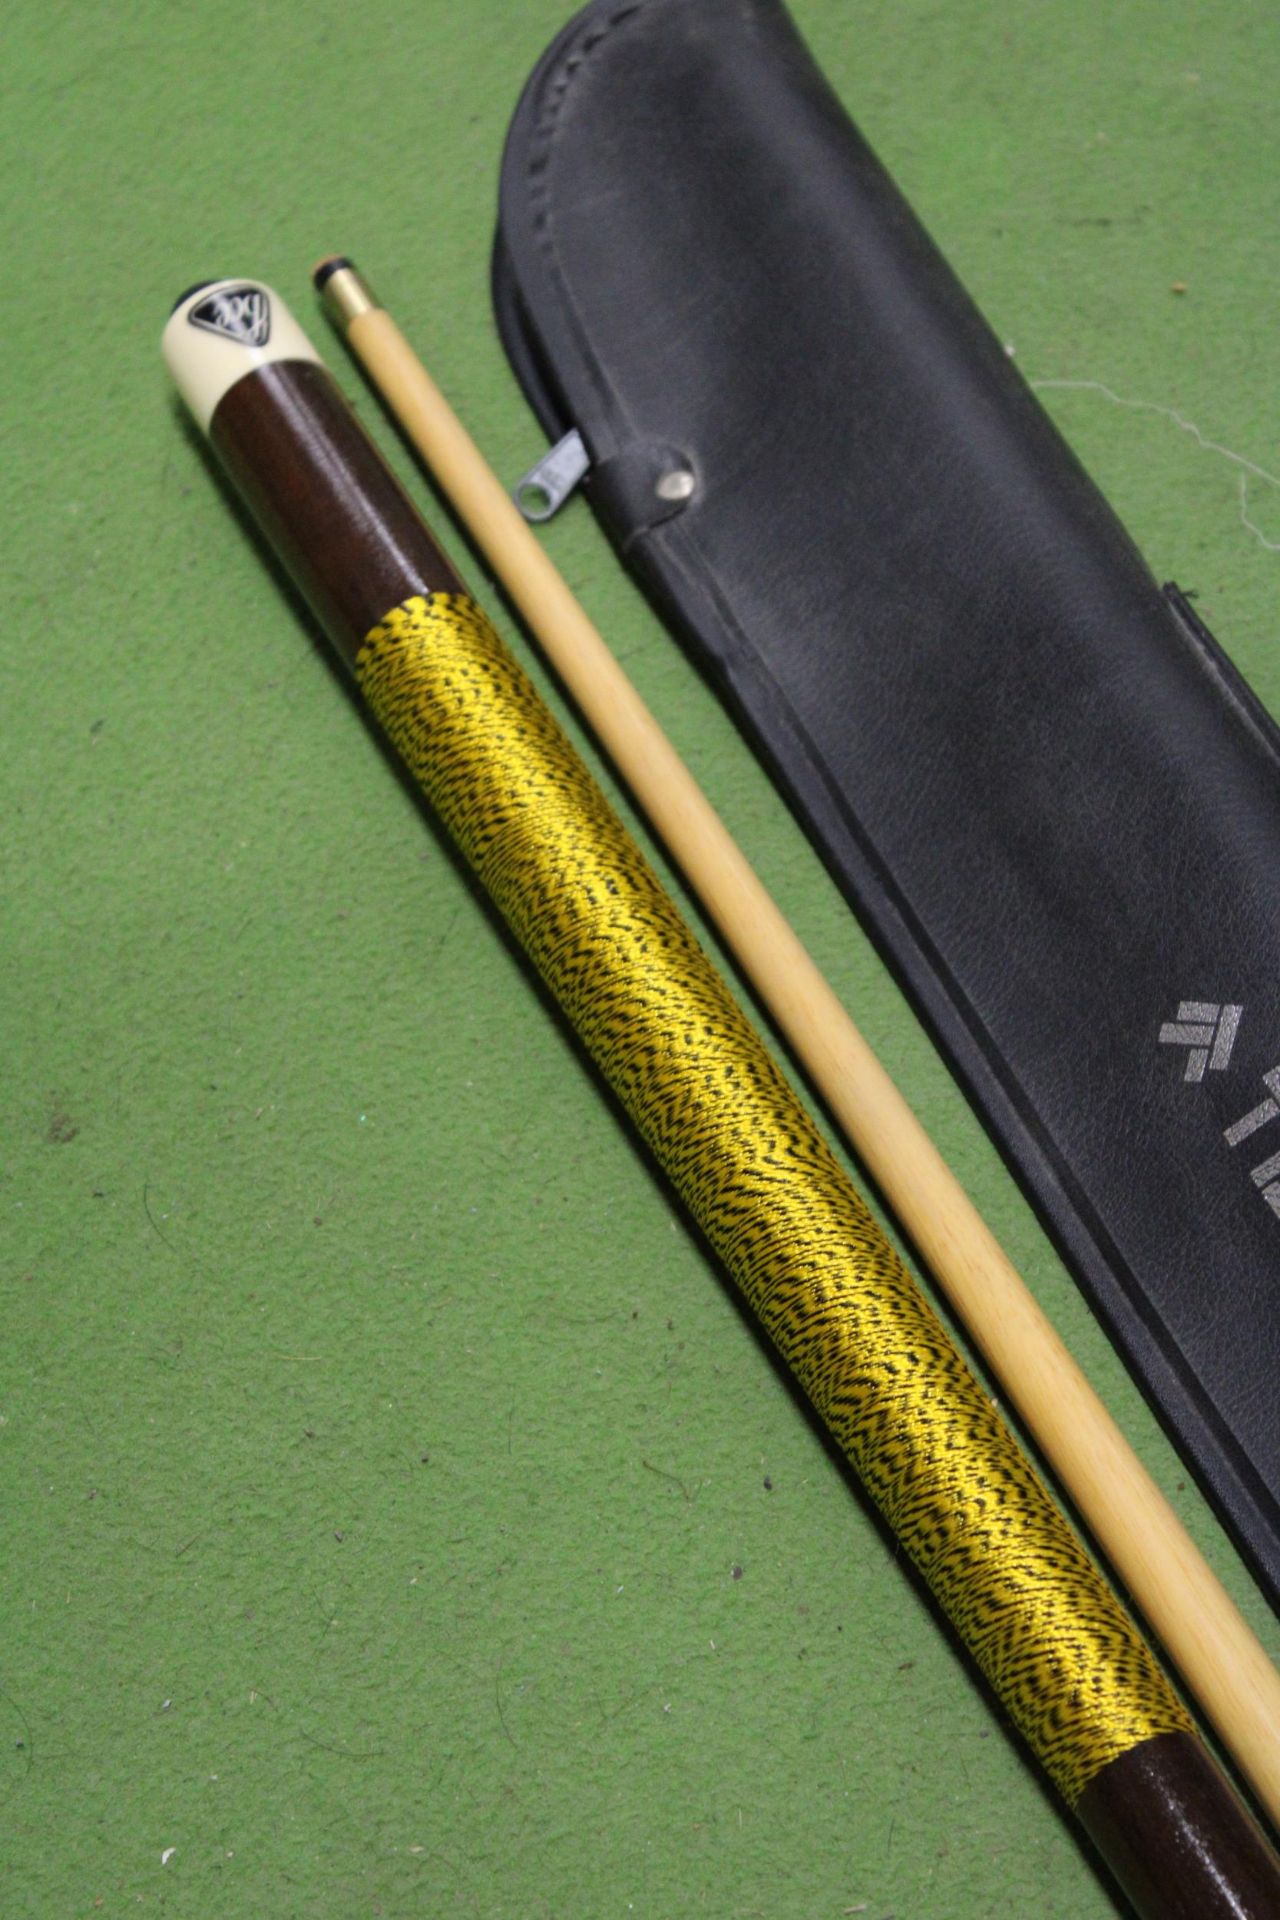 A BCE POOL/SNOOKER CUE IN A SOFT CASE - Image 6 of 6